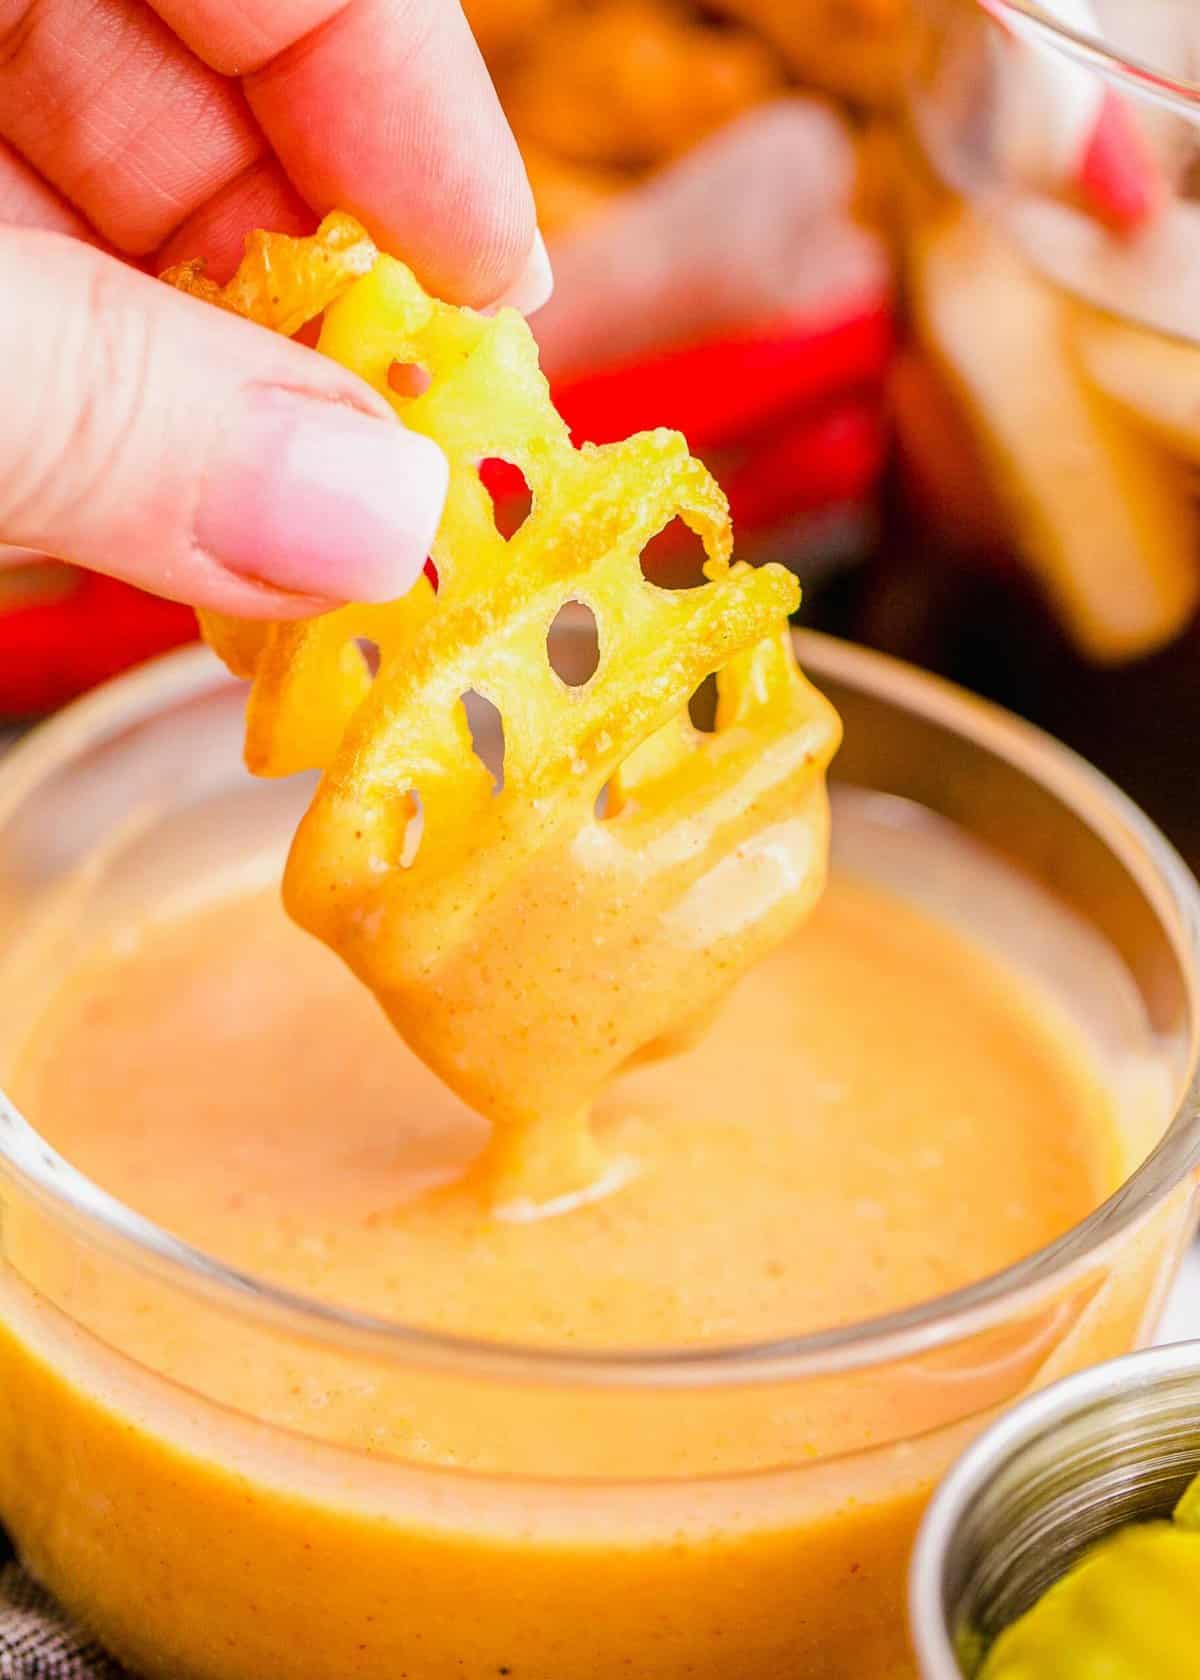 Hand dipping waffle fry into Chick-Fil-A sauce